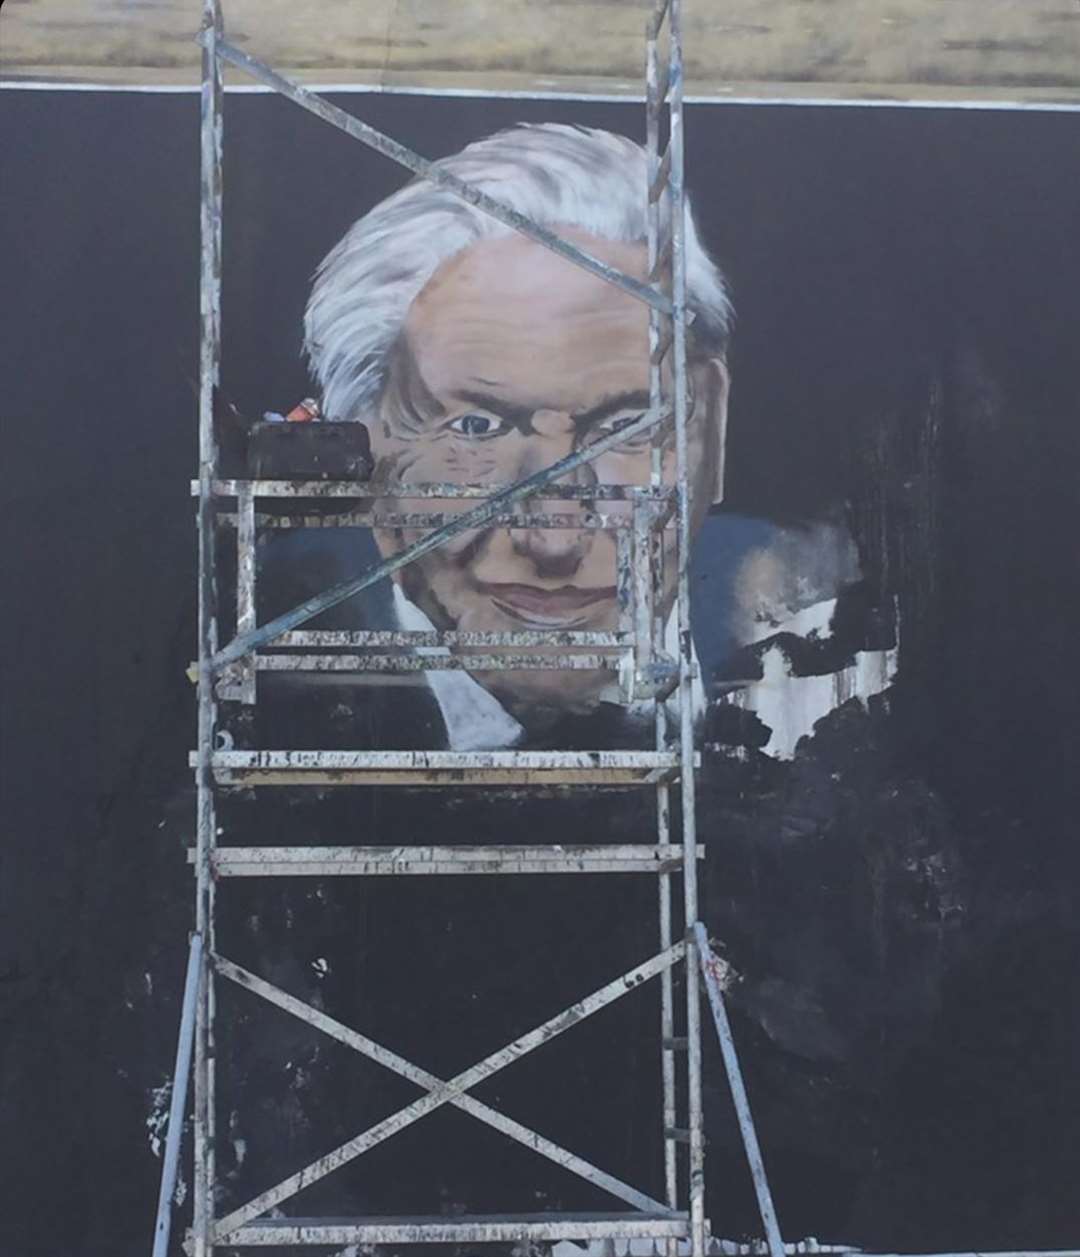 Graffiti artist Paddy Watts hopes the Sir David Attenborough mural will prompt beachgoers to treat the seaside with respect. Picture: @pad303